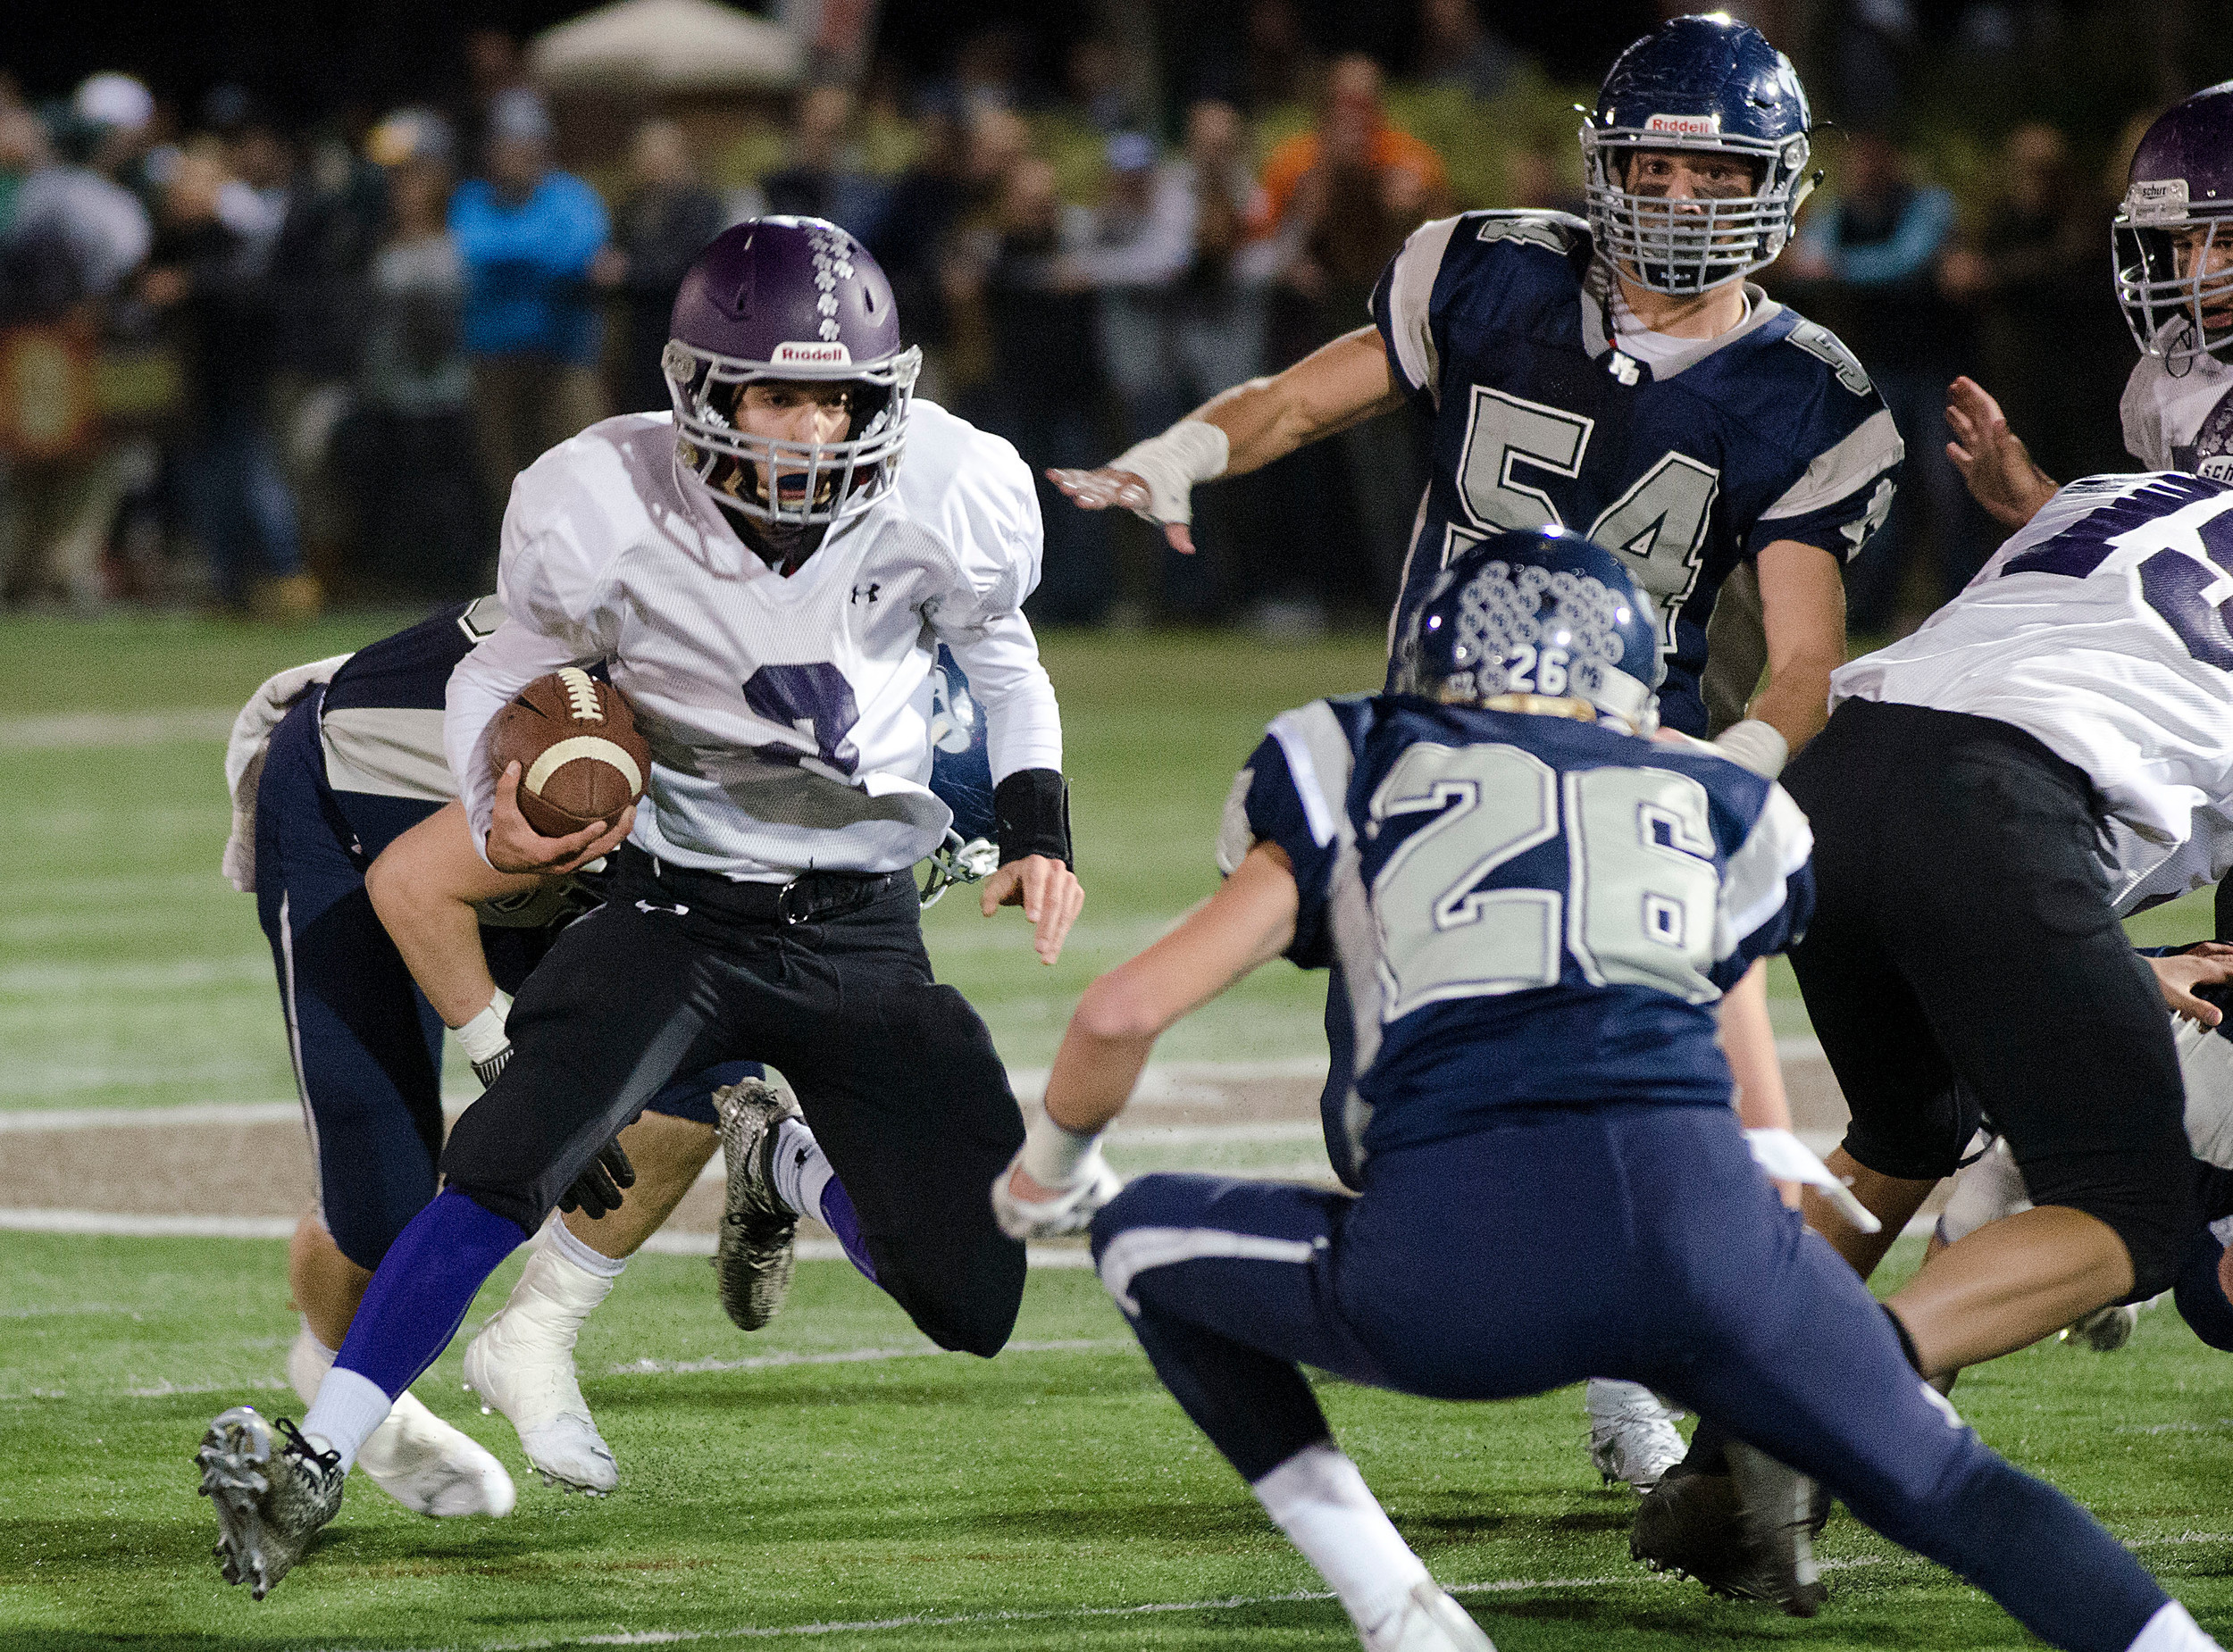 Huskies quarterback Vincent Berretto runs up the middle in the first half.